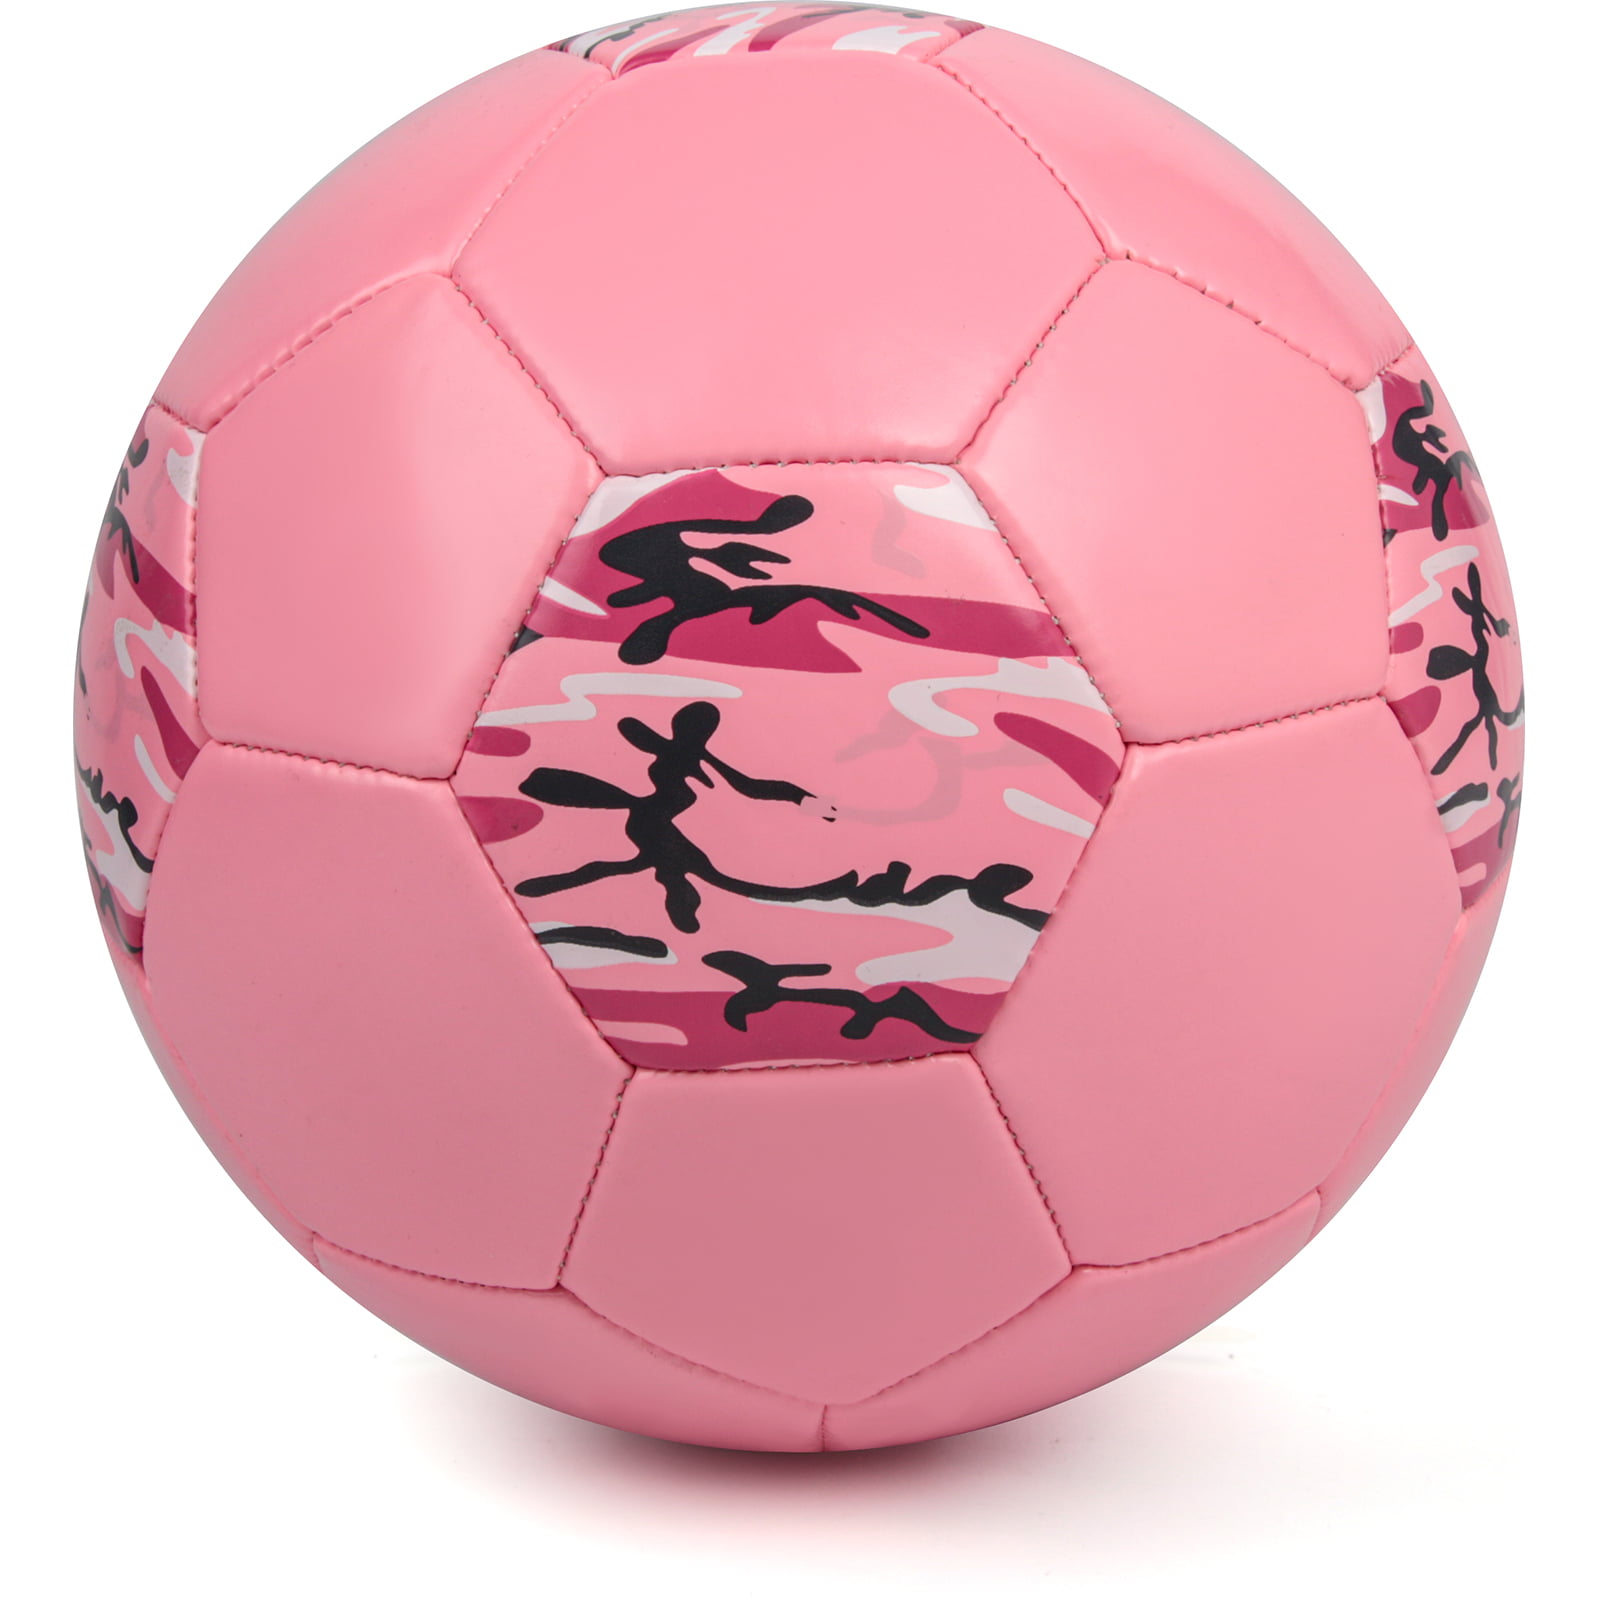 Official Size League Football Deluxe Nylon Wound inflate and play 